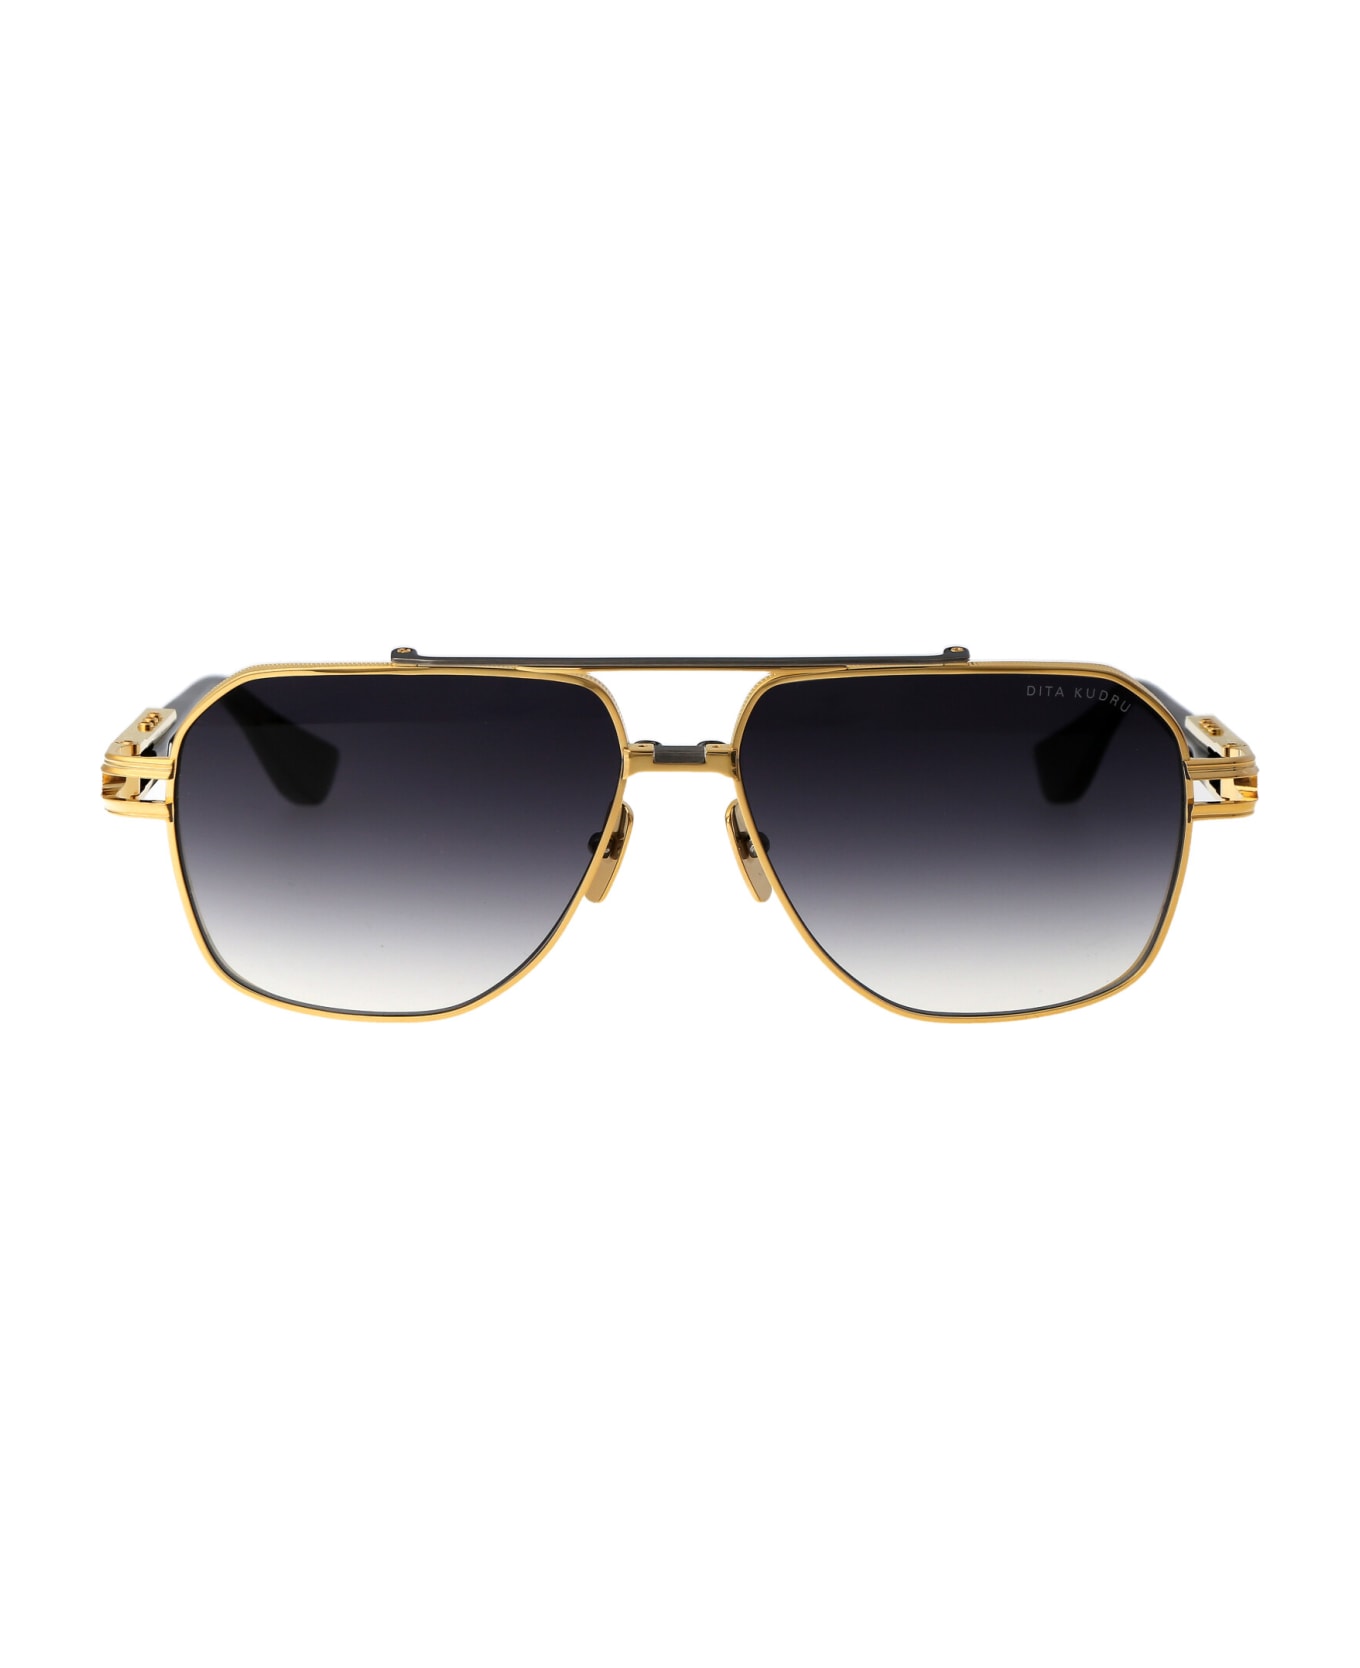 Dita Kudru Sunglasses - 01 YELLOW GOLD - ANTIQUE SILVER W/ GREY TO CLEAR GRADIENT サングラス